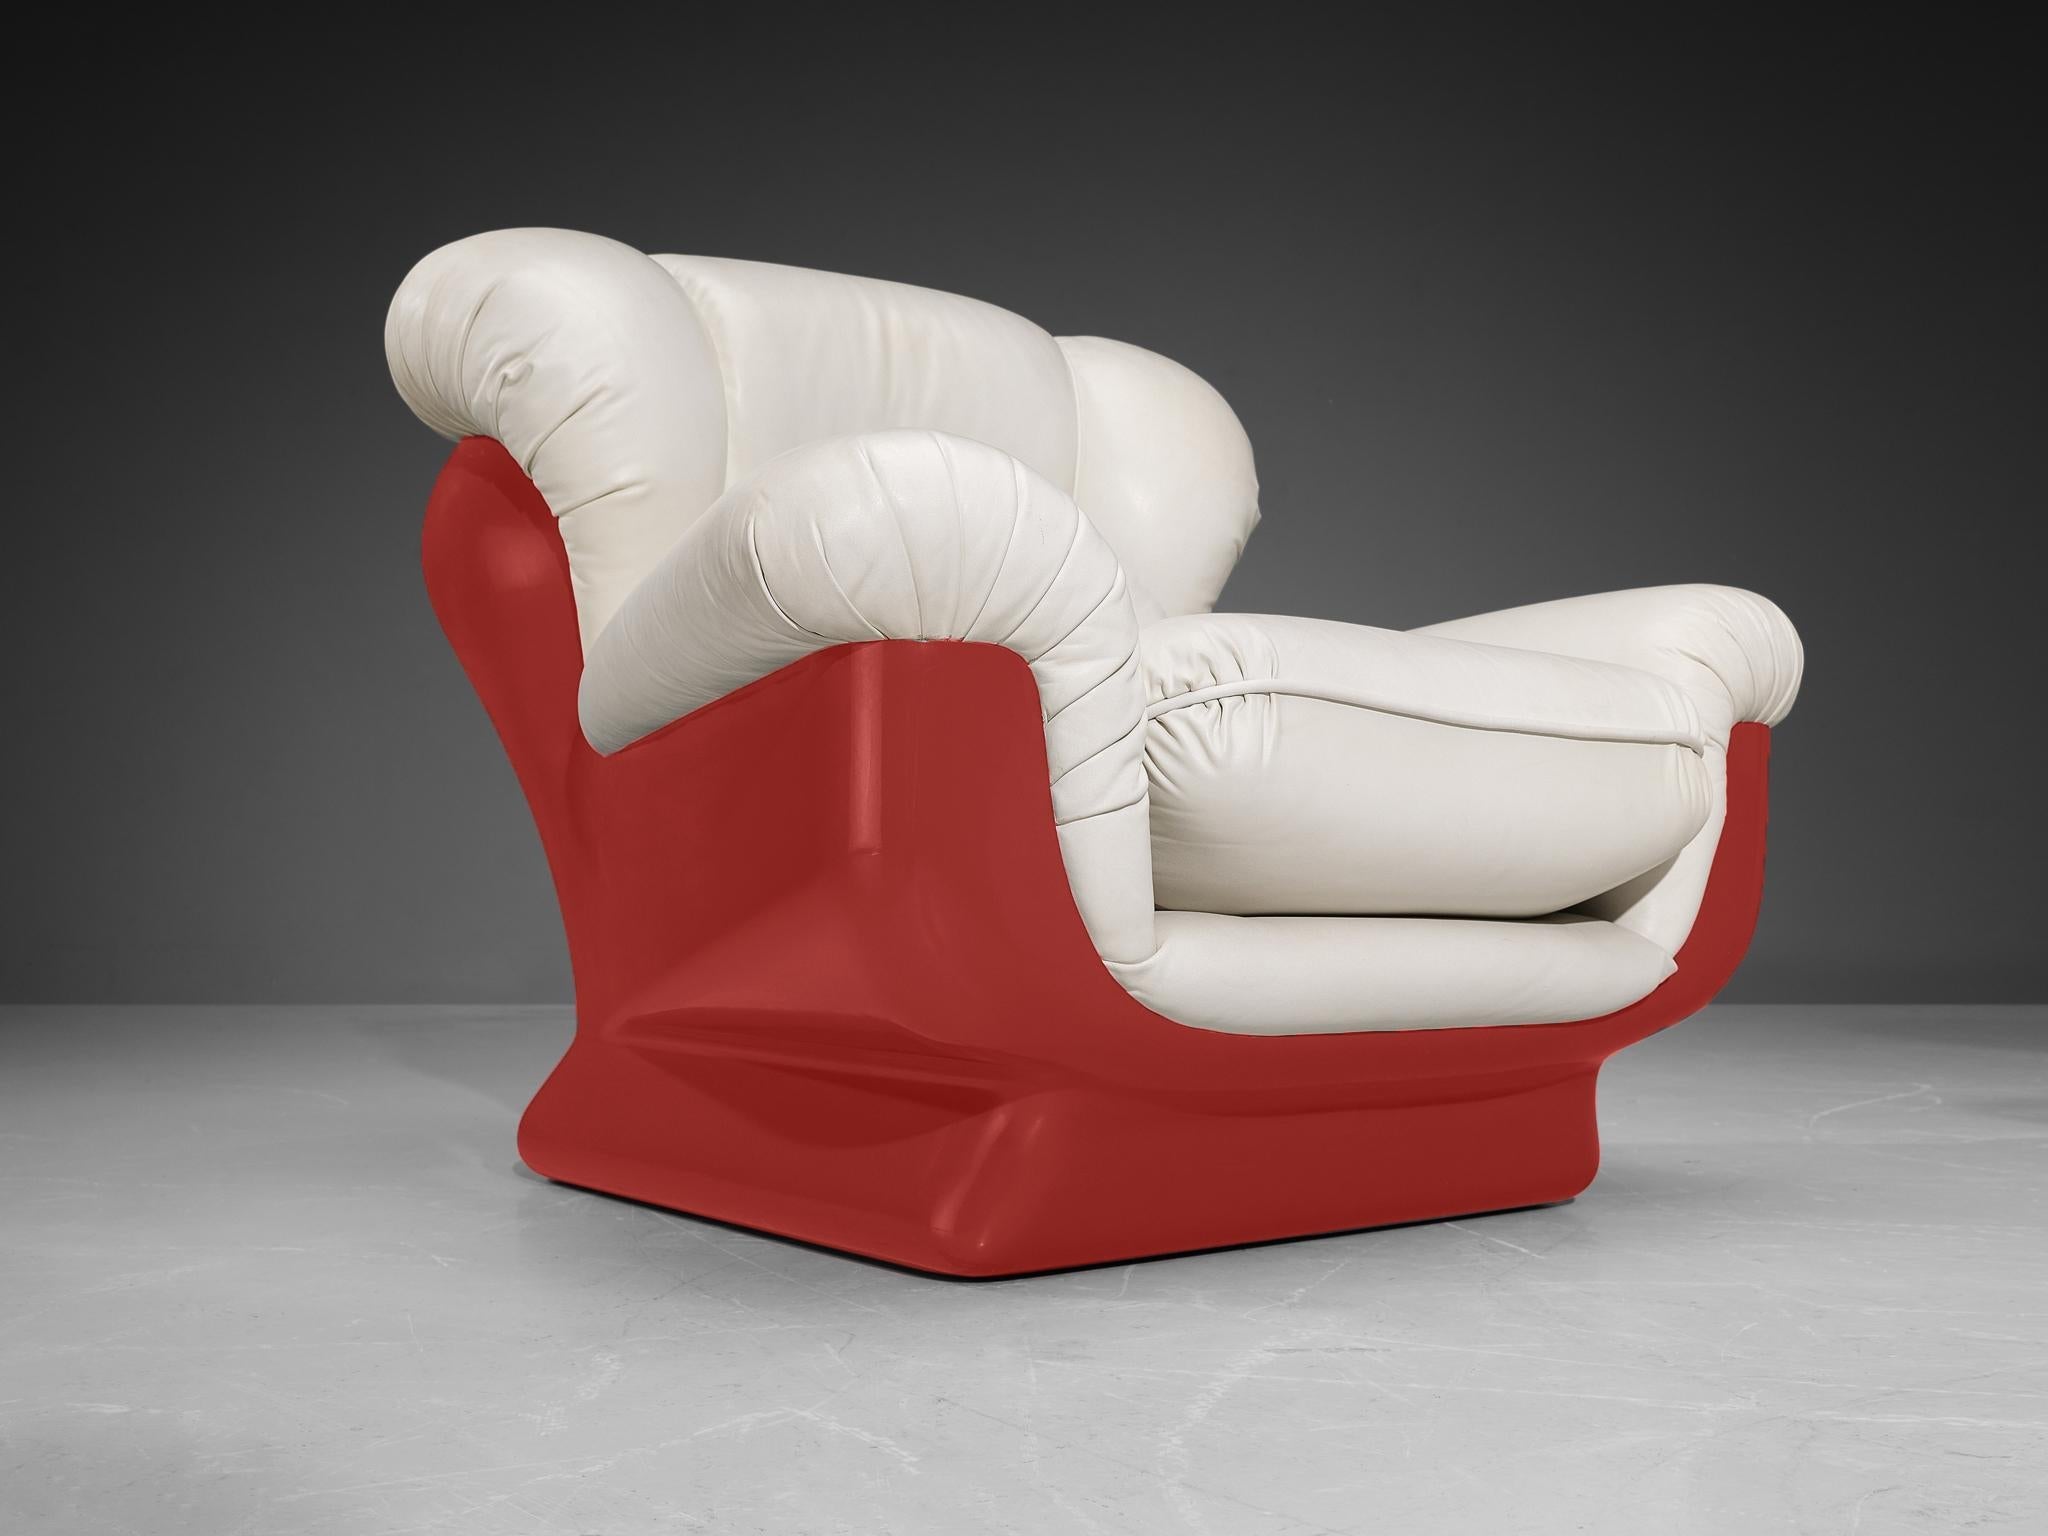 Italian Bulky Pair of Lounge Chairs in Red Fiberglass and Leatherette